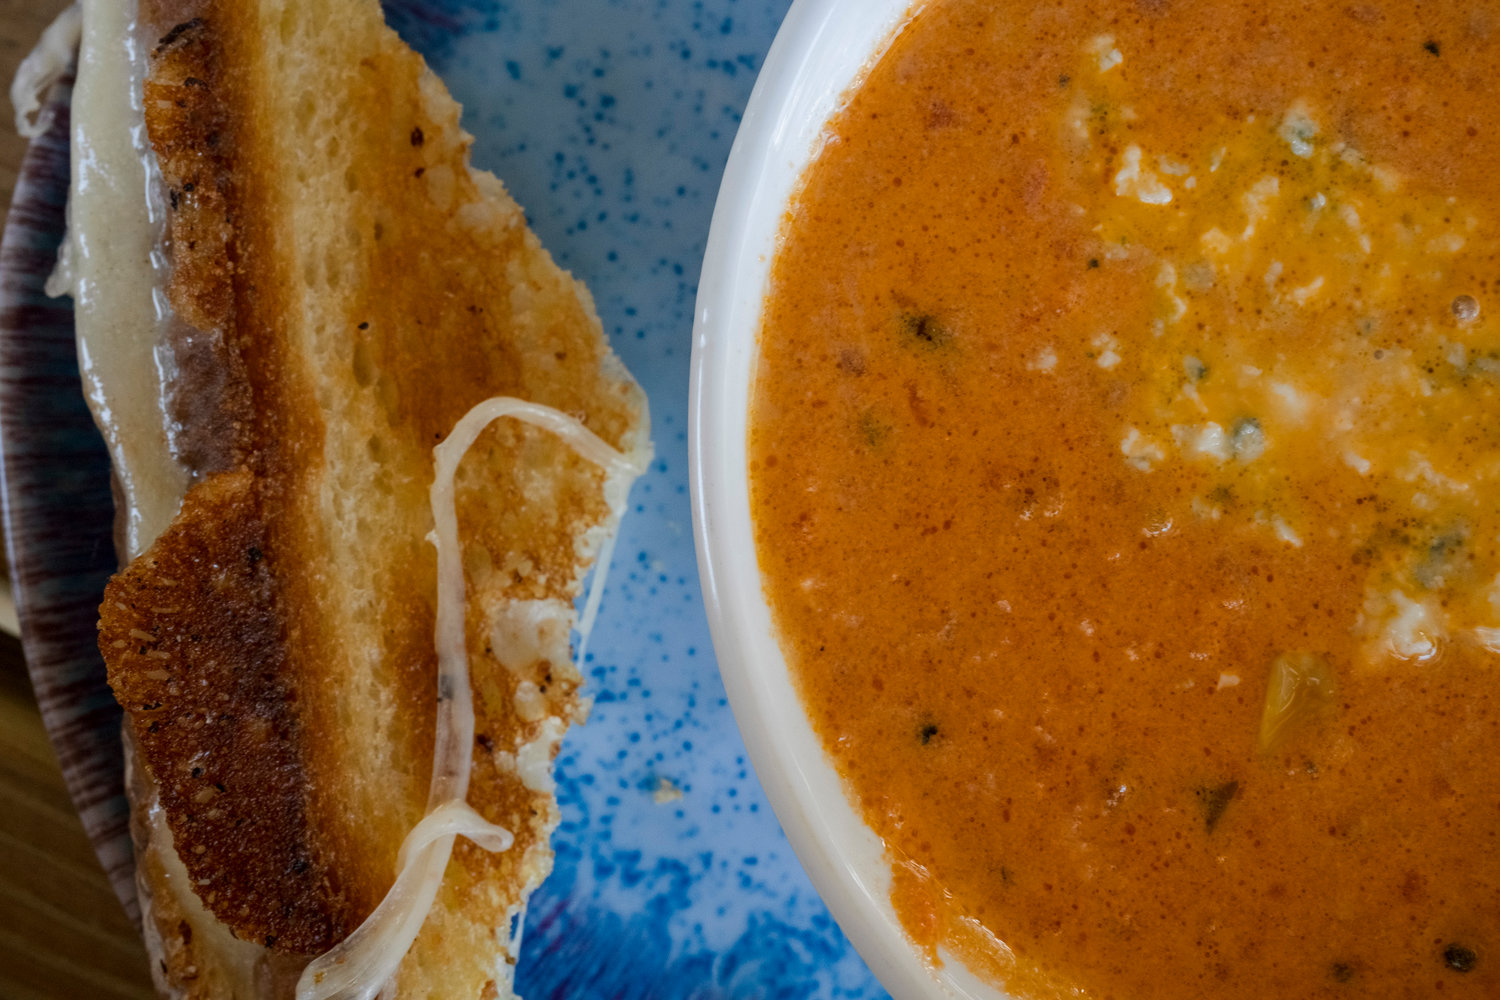 The tour stop at Bay Breeze Cafe includes the tomato and corn bisque with blue cheese crumbles and the grown-up grilled cheese.